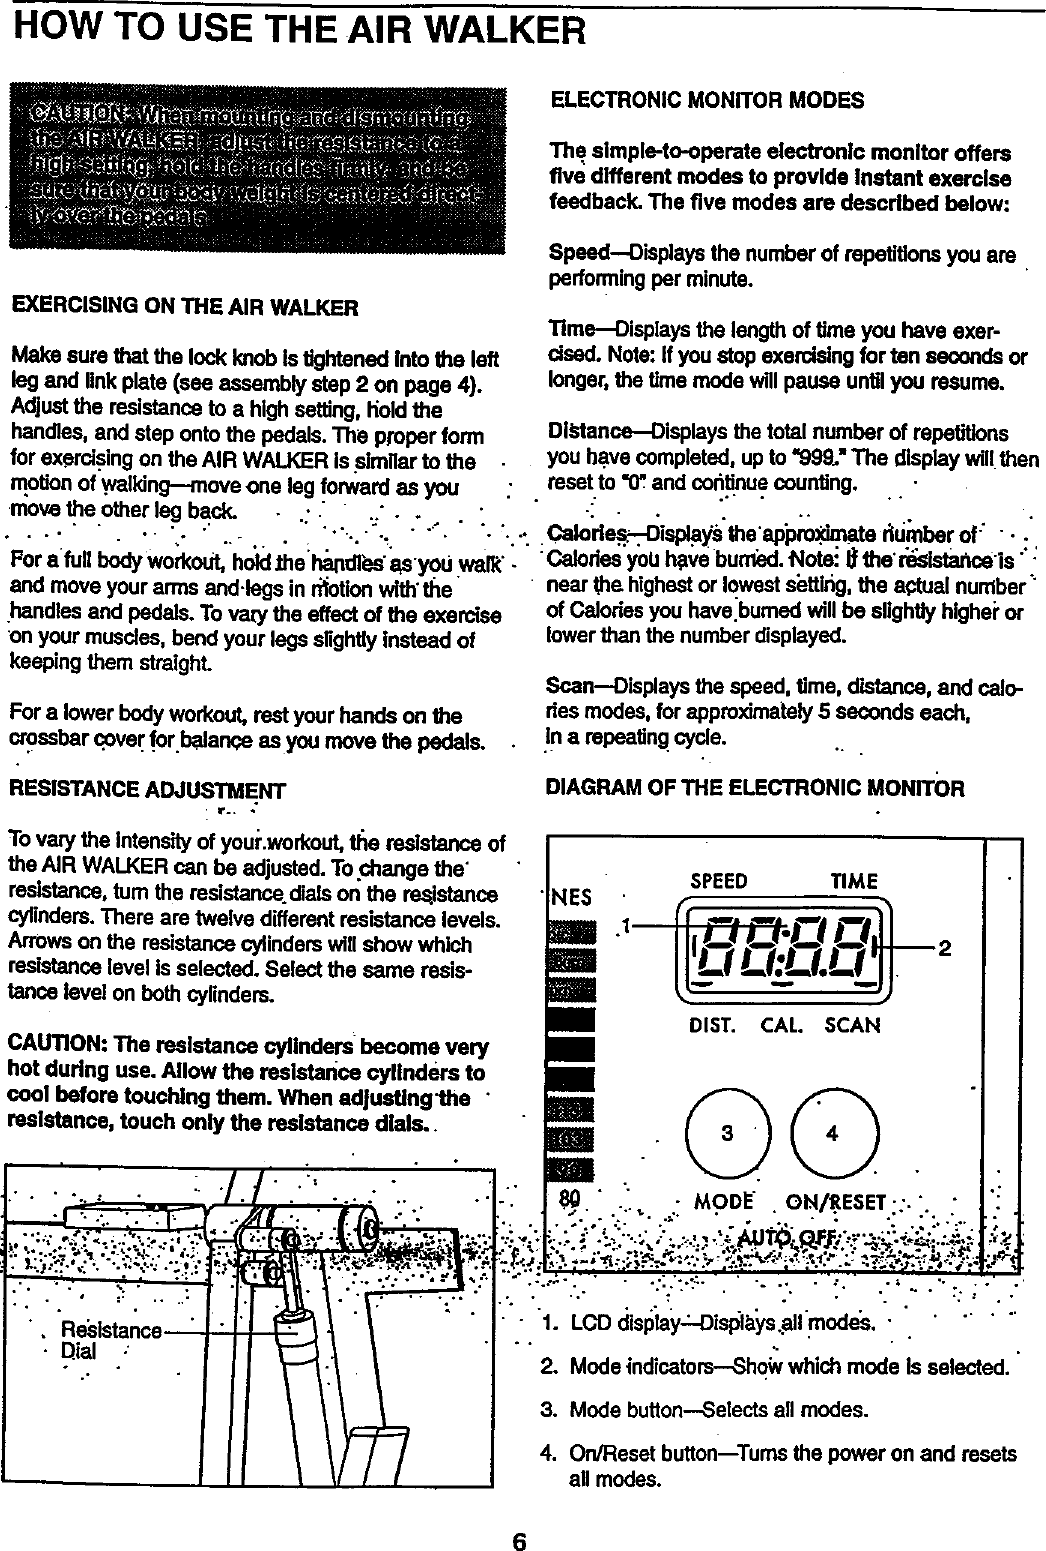 Page 6 of 12 - Proform 831290841 User Manual  AIR WALKER - Manuals And Guides 99020075